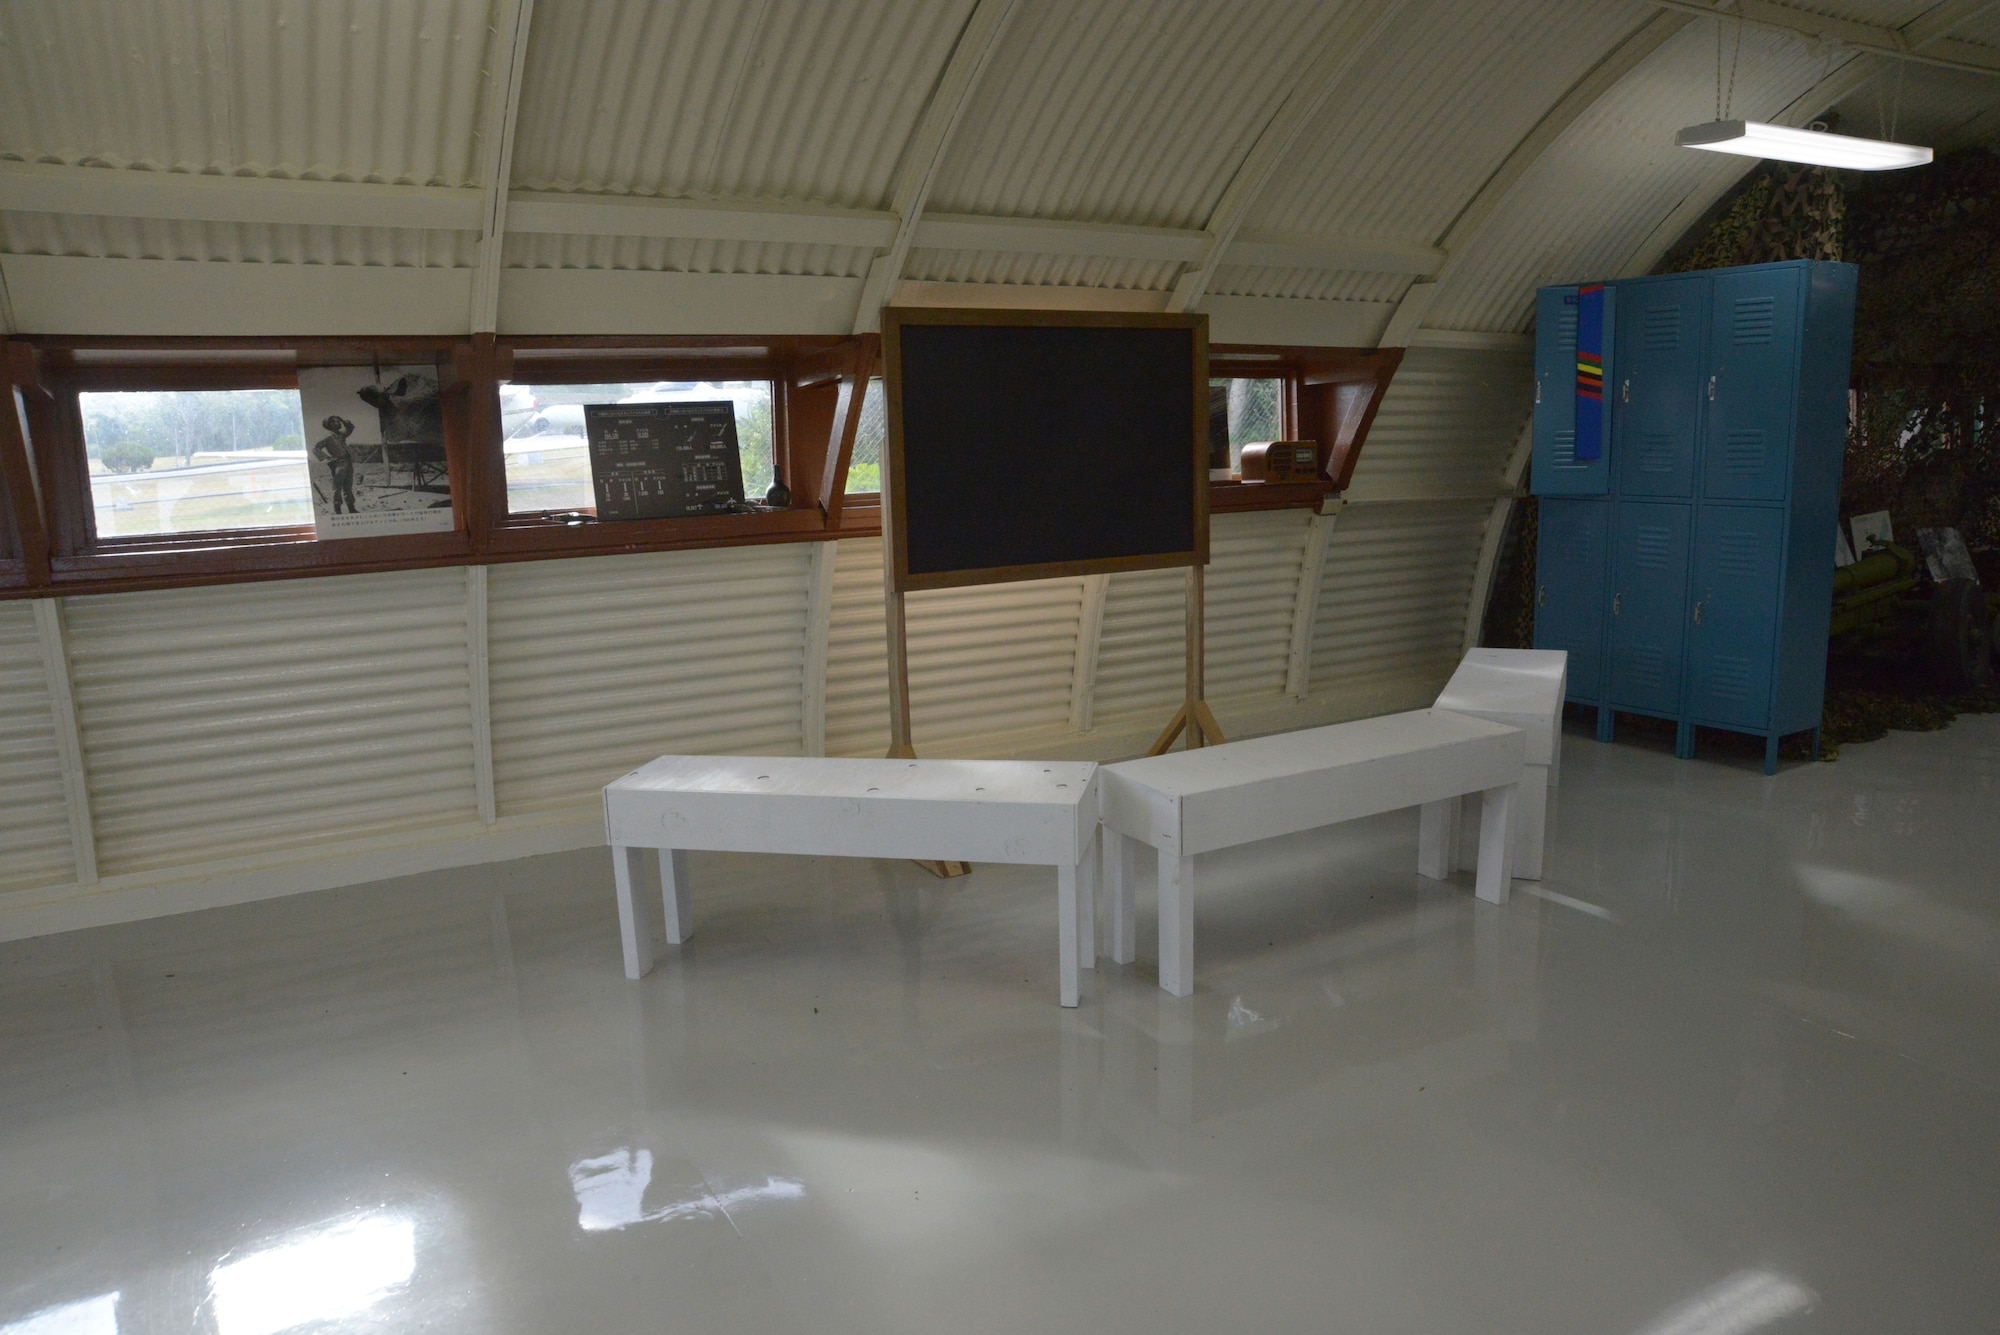 Decades ago, most on-base, indoor activities took place in Quonset huts.  This shows how a hut used for daily briefings would have looked in its hayday.  This is the last standing Quonset hut on Kadena Air Base, Japan.  It was recently renovated to show Airmen of today what life was like on their base years ago. (U.S. Air Force photo by Tech. Sgt. Jocelyn Rich-Pendracki/Released)